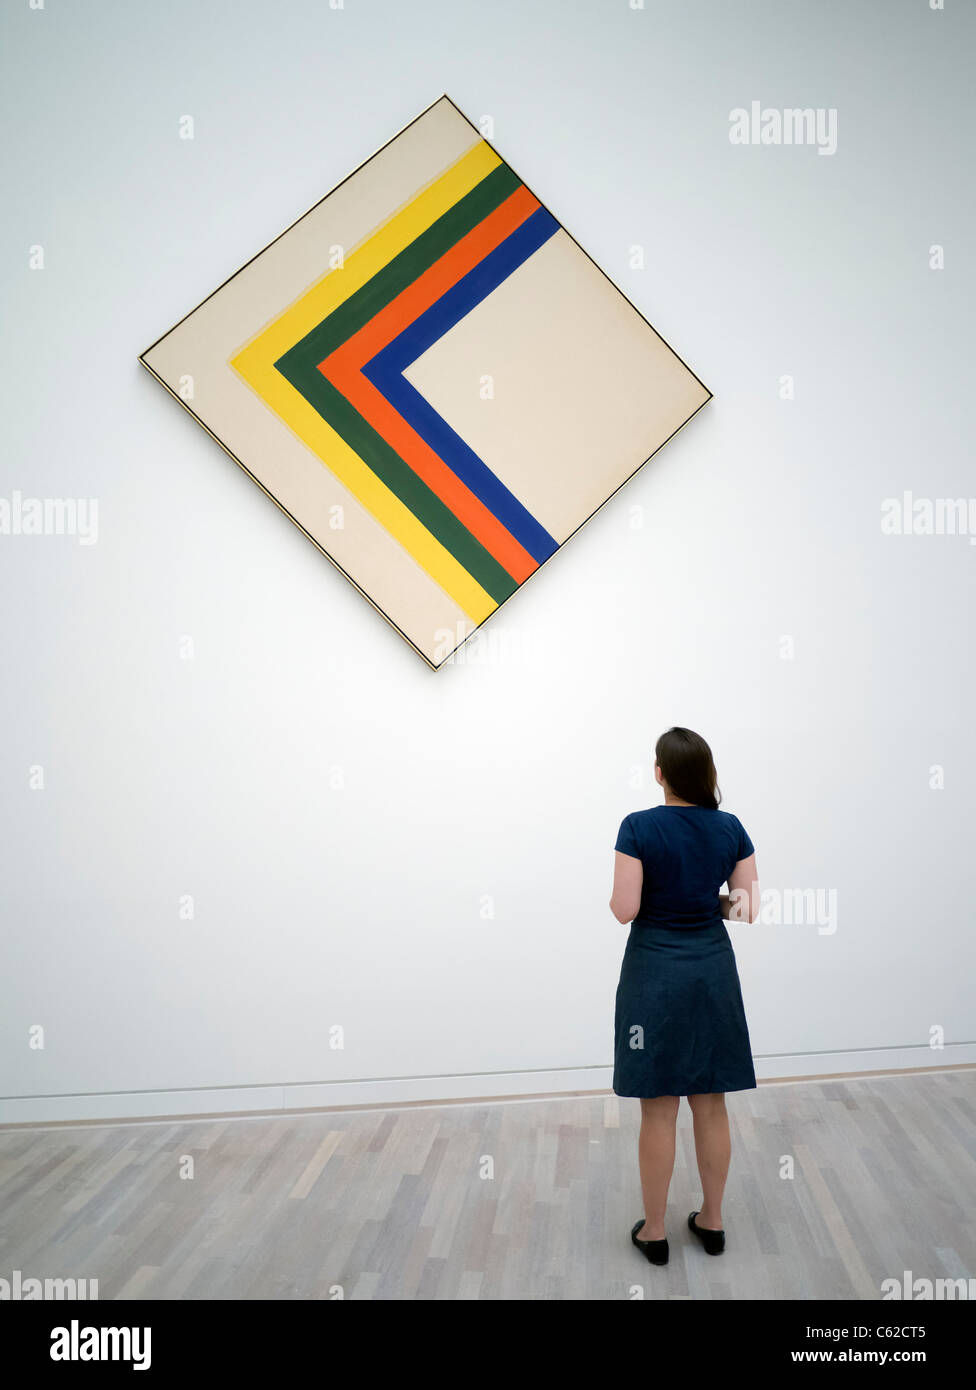 Woman looking at painting Swing by Kenneth Noland at K20 art museum or Kunstsammlung at Grabbeplatz Dusseldorf Germany Stock Photo